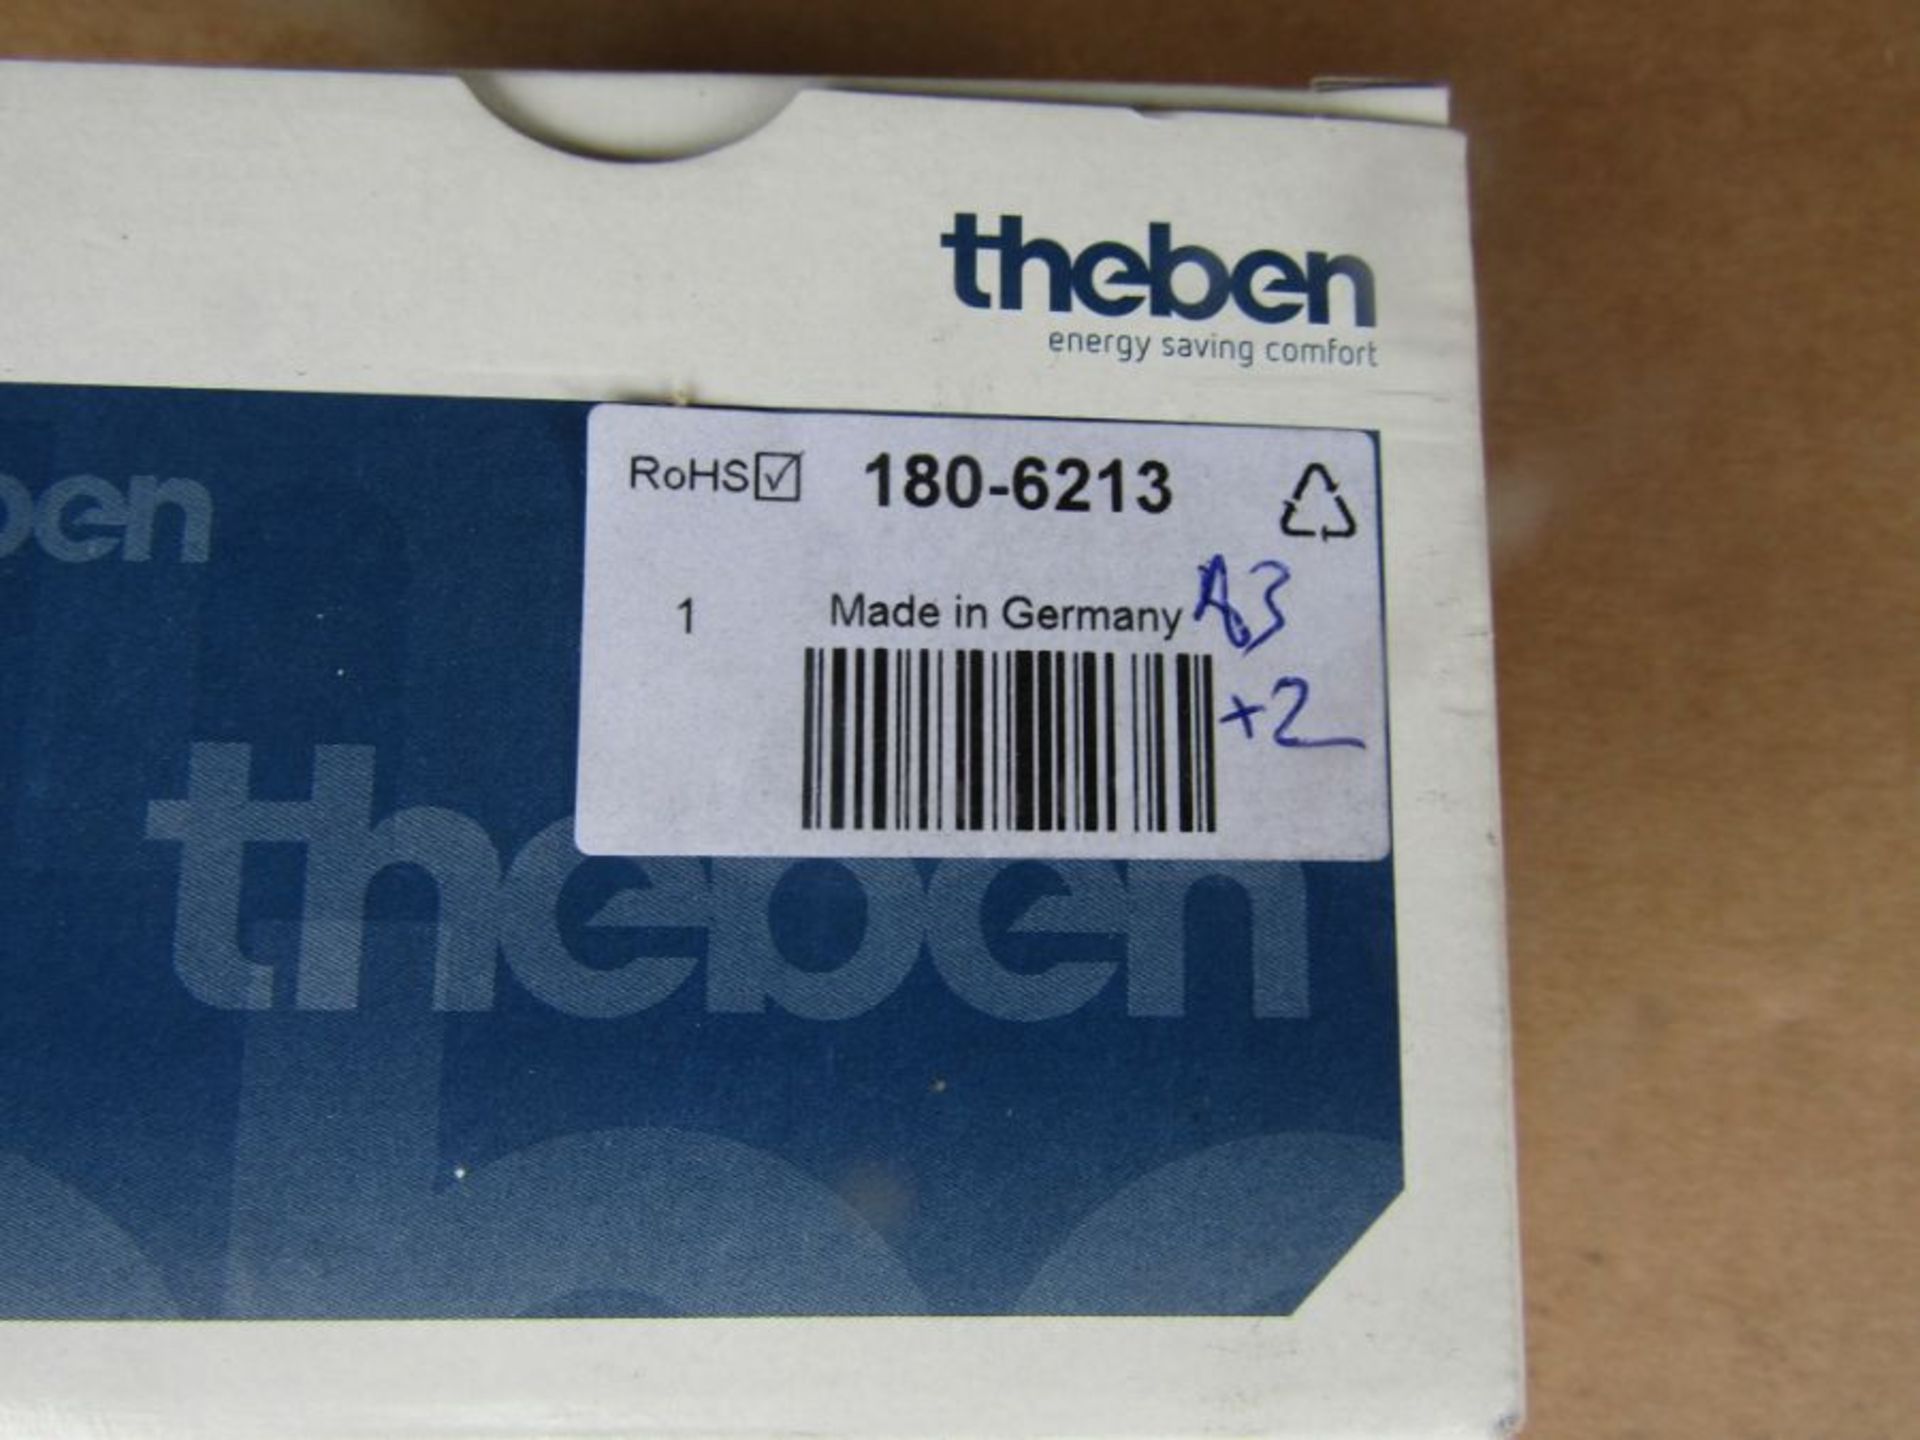 Theben Digital SELEKTA 171 RC TOP 3 DIN Rail Time Switch 110 230 V ac 1-Channel A3 1806213 - Image 3 of 3